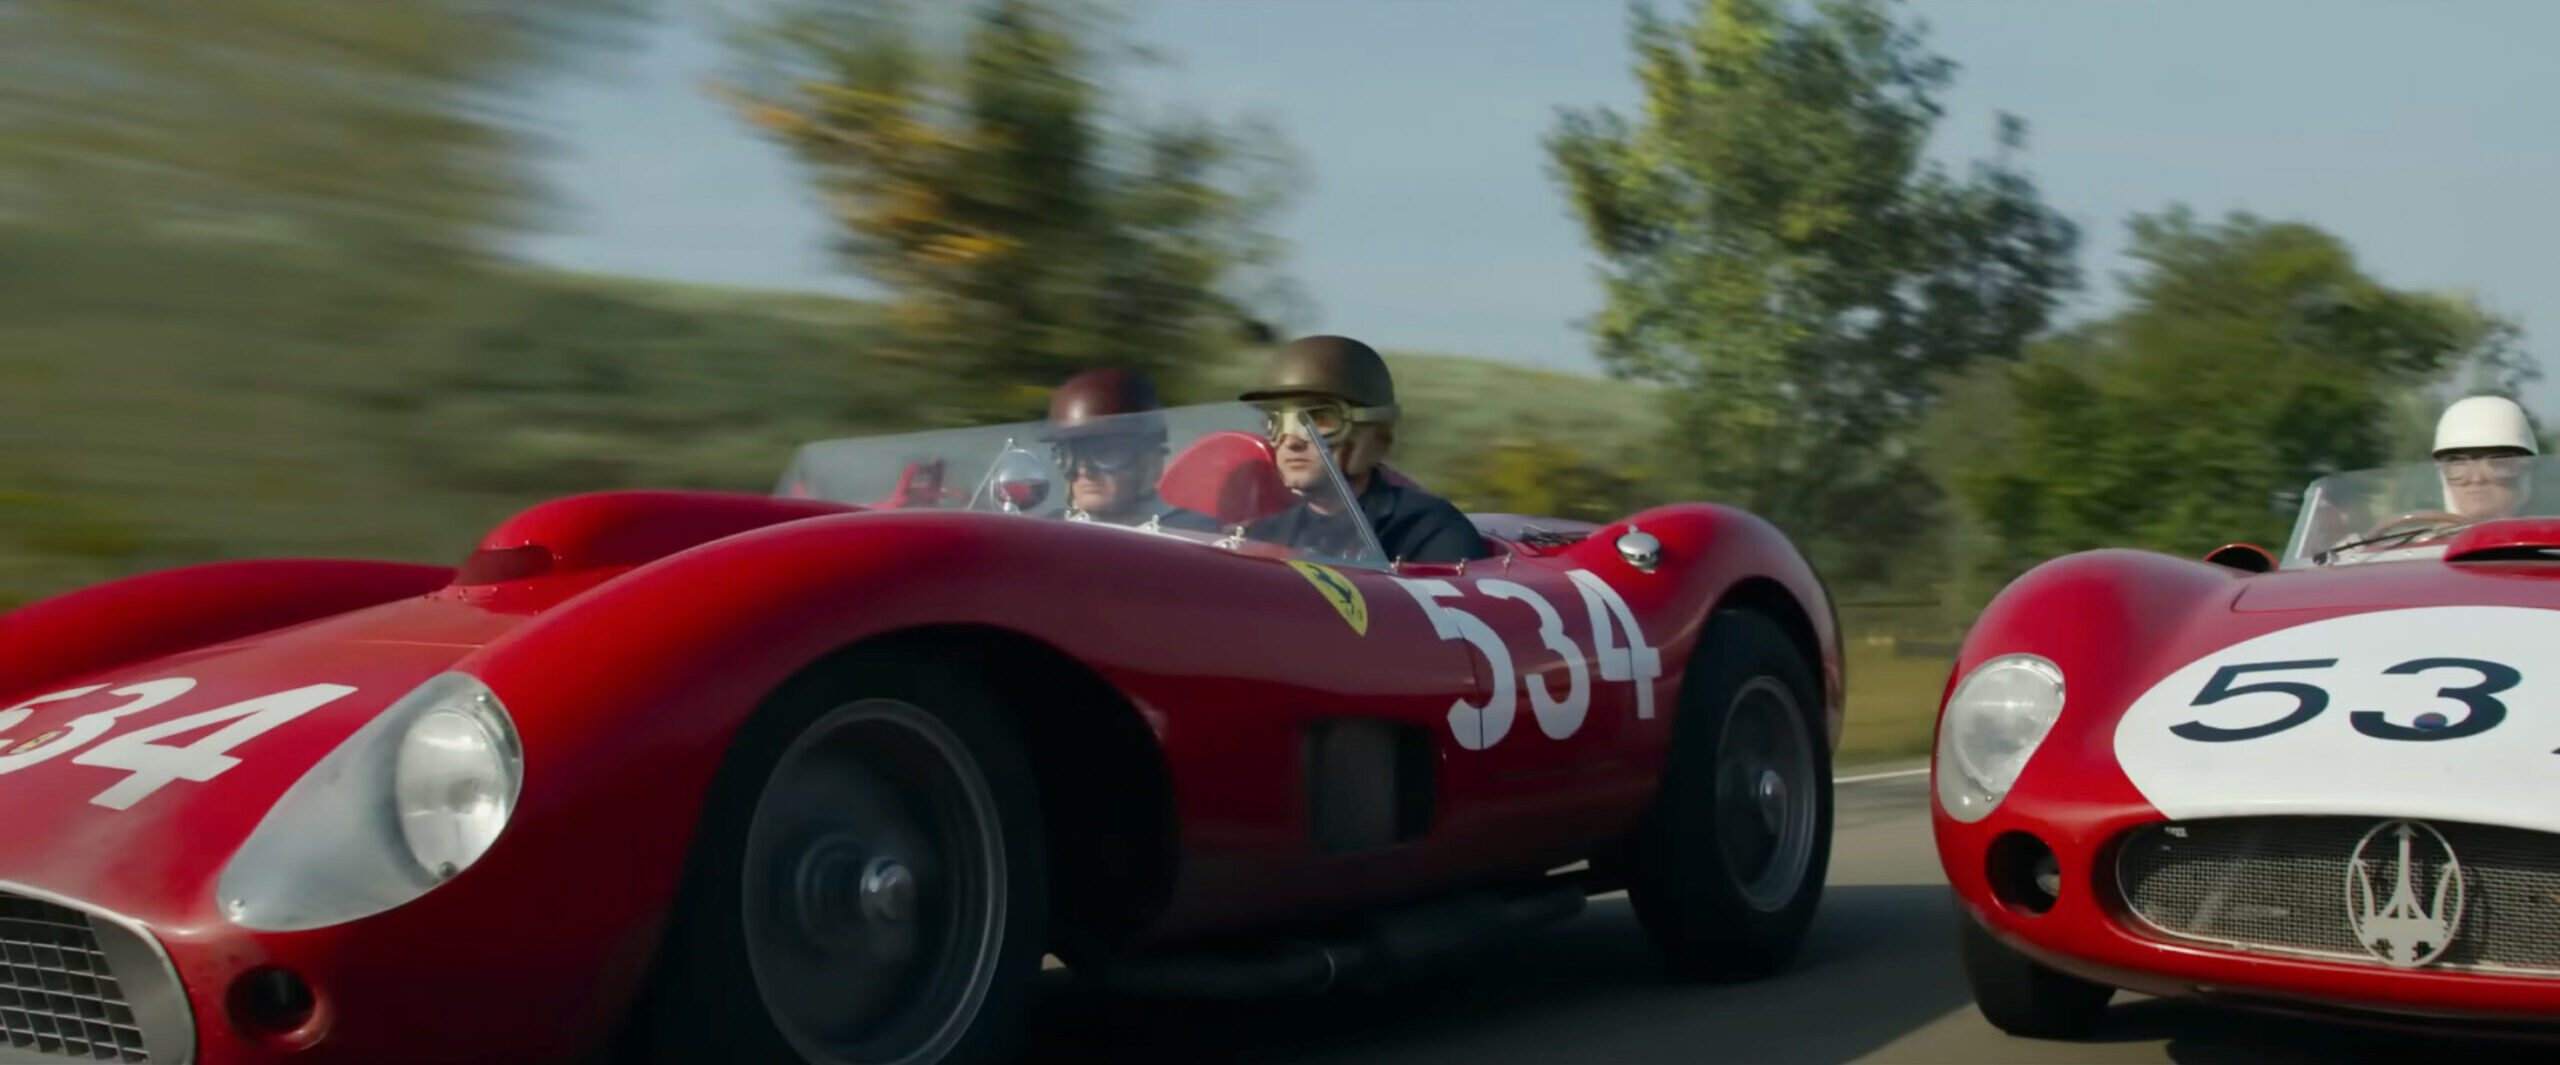 Ferrari captures the exhilaration of victory – and its dreadful cost